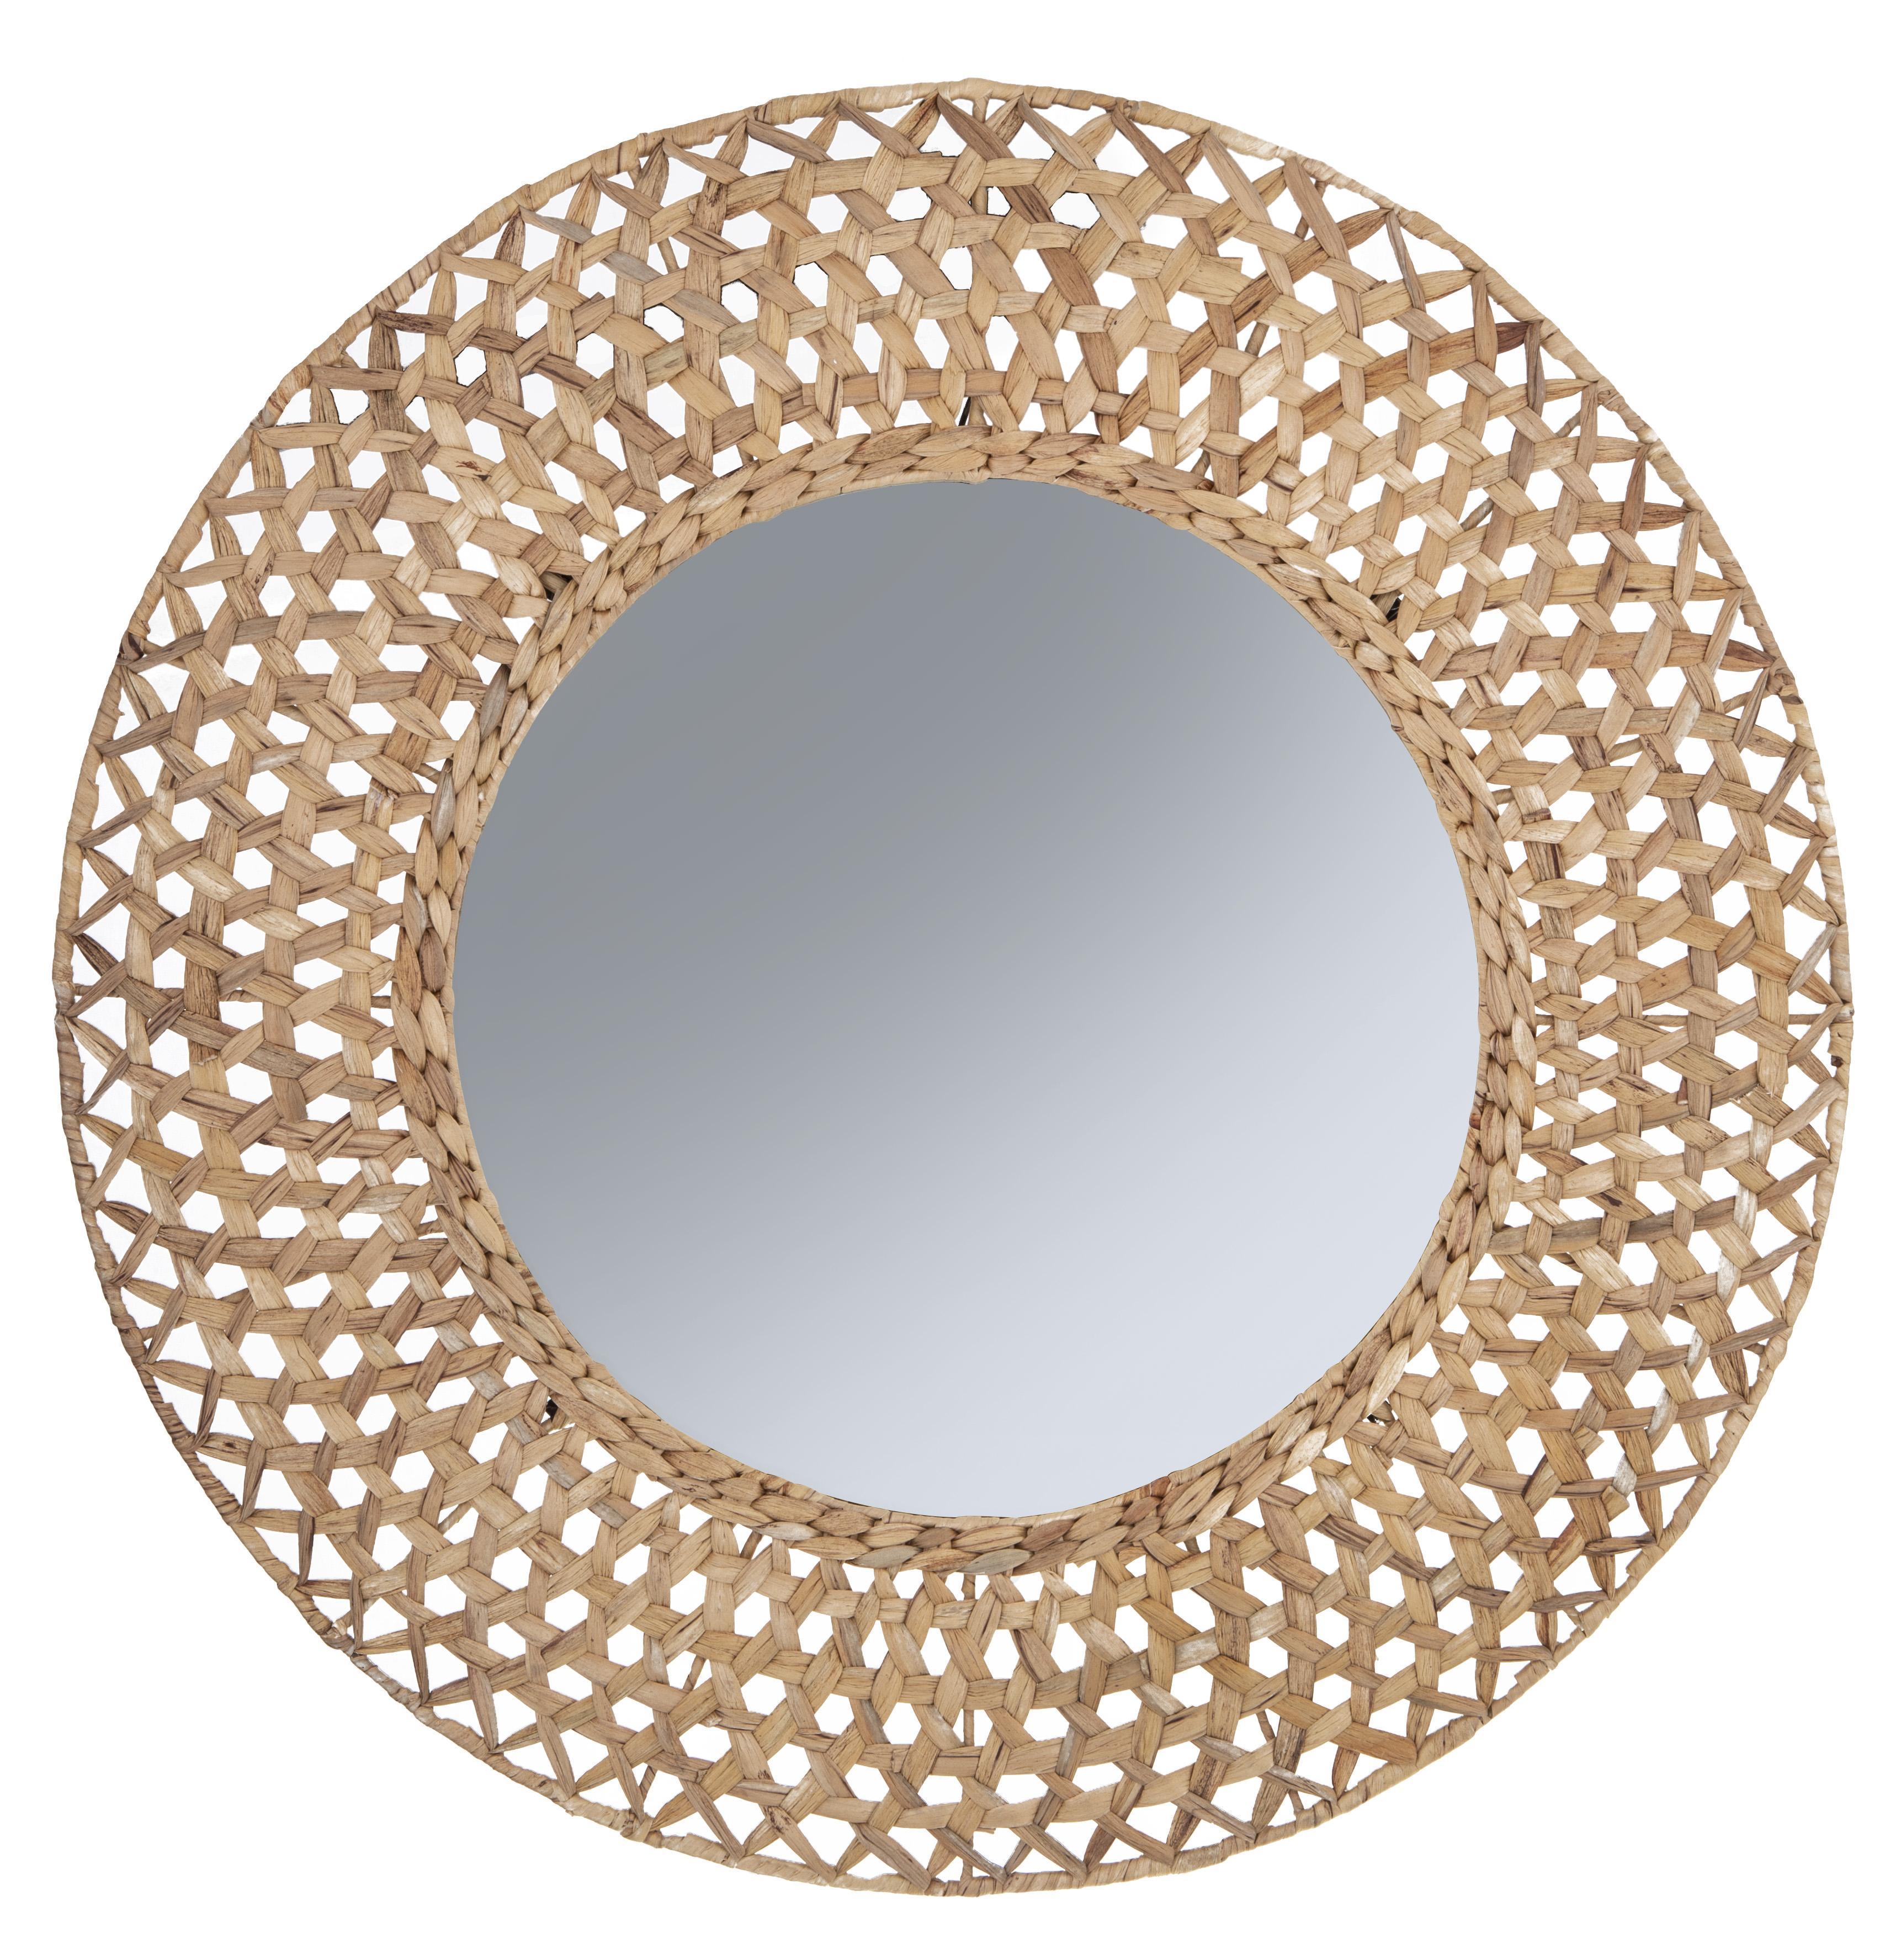 Amalfi Riviera Large Wall Make Up Mirror Home/Office Hanging Decor Round 80cm Natural